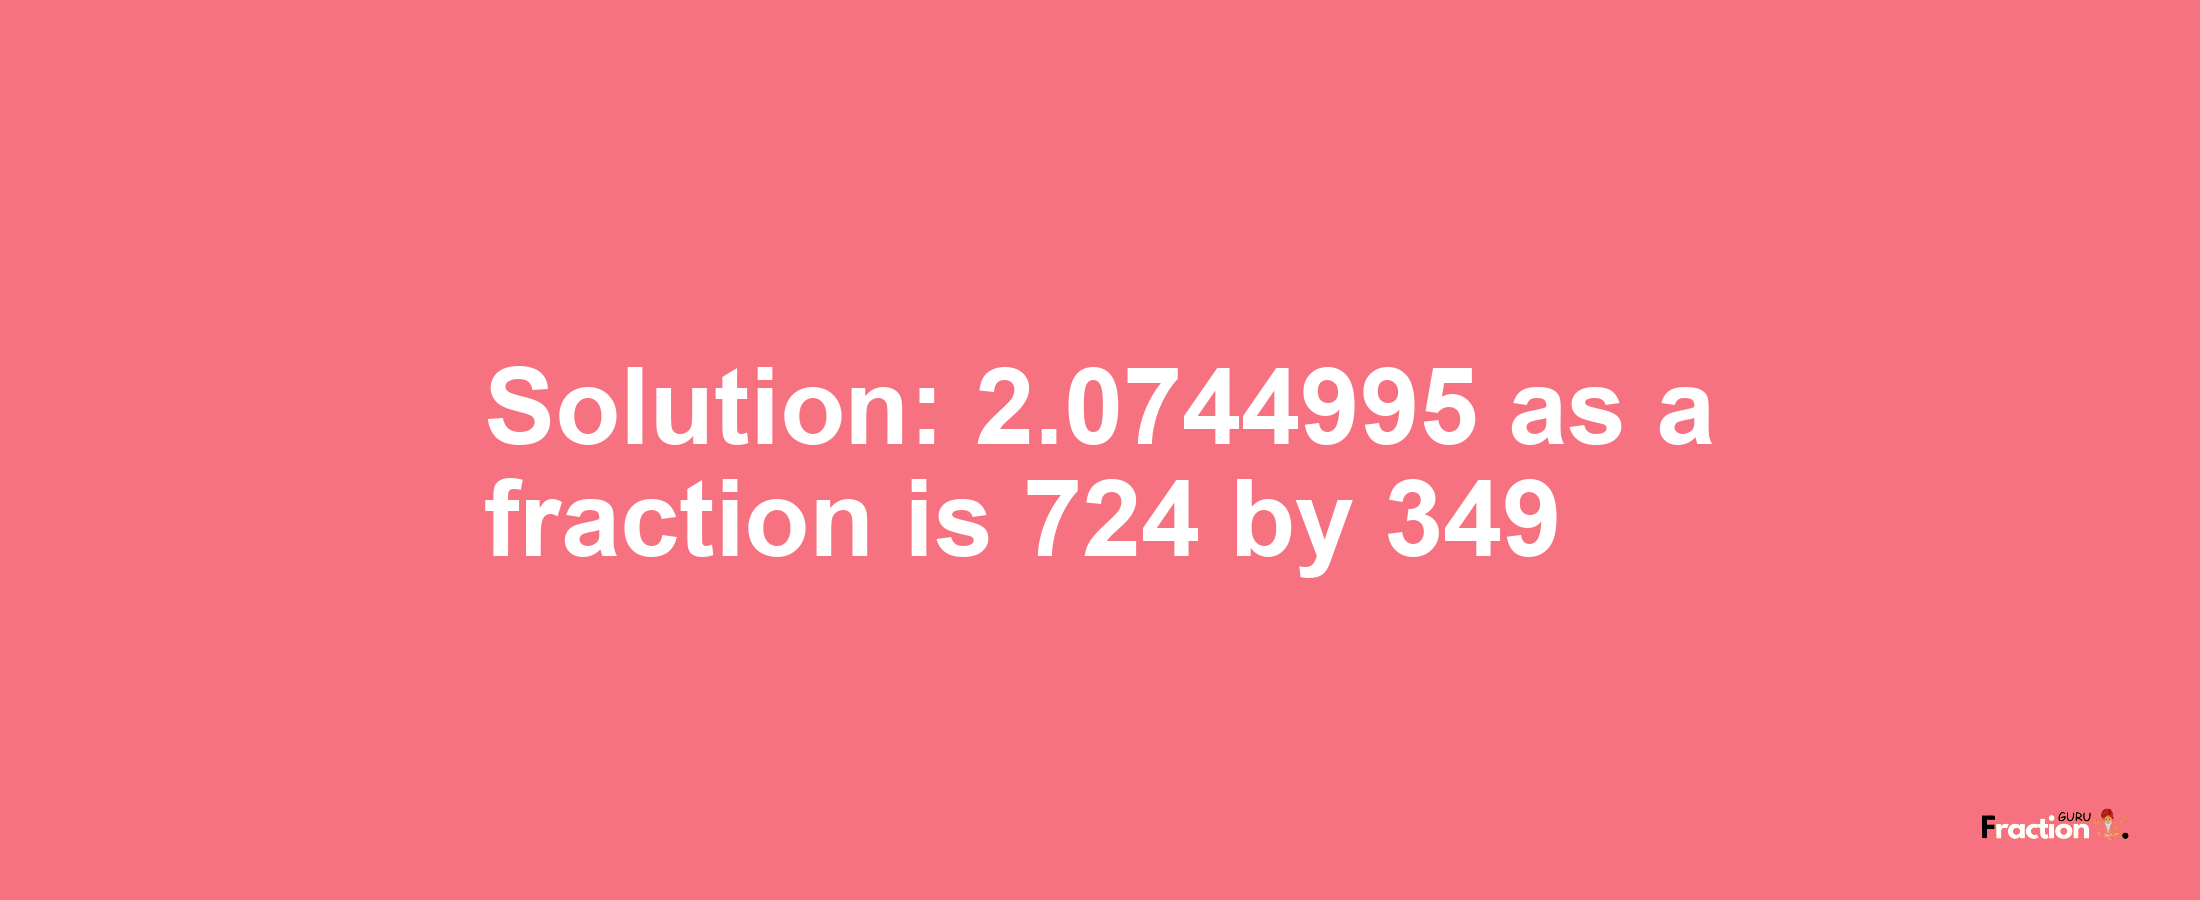 Solution:2.0744995 as a fraction is 724/349